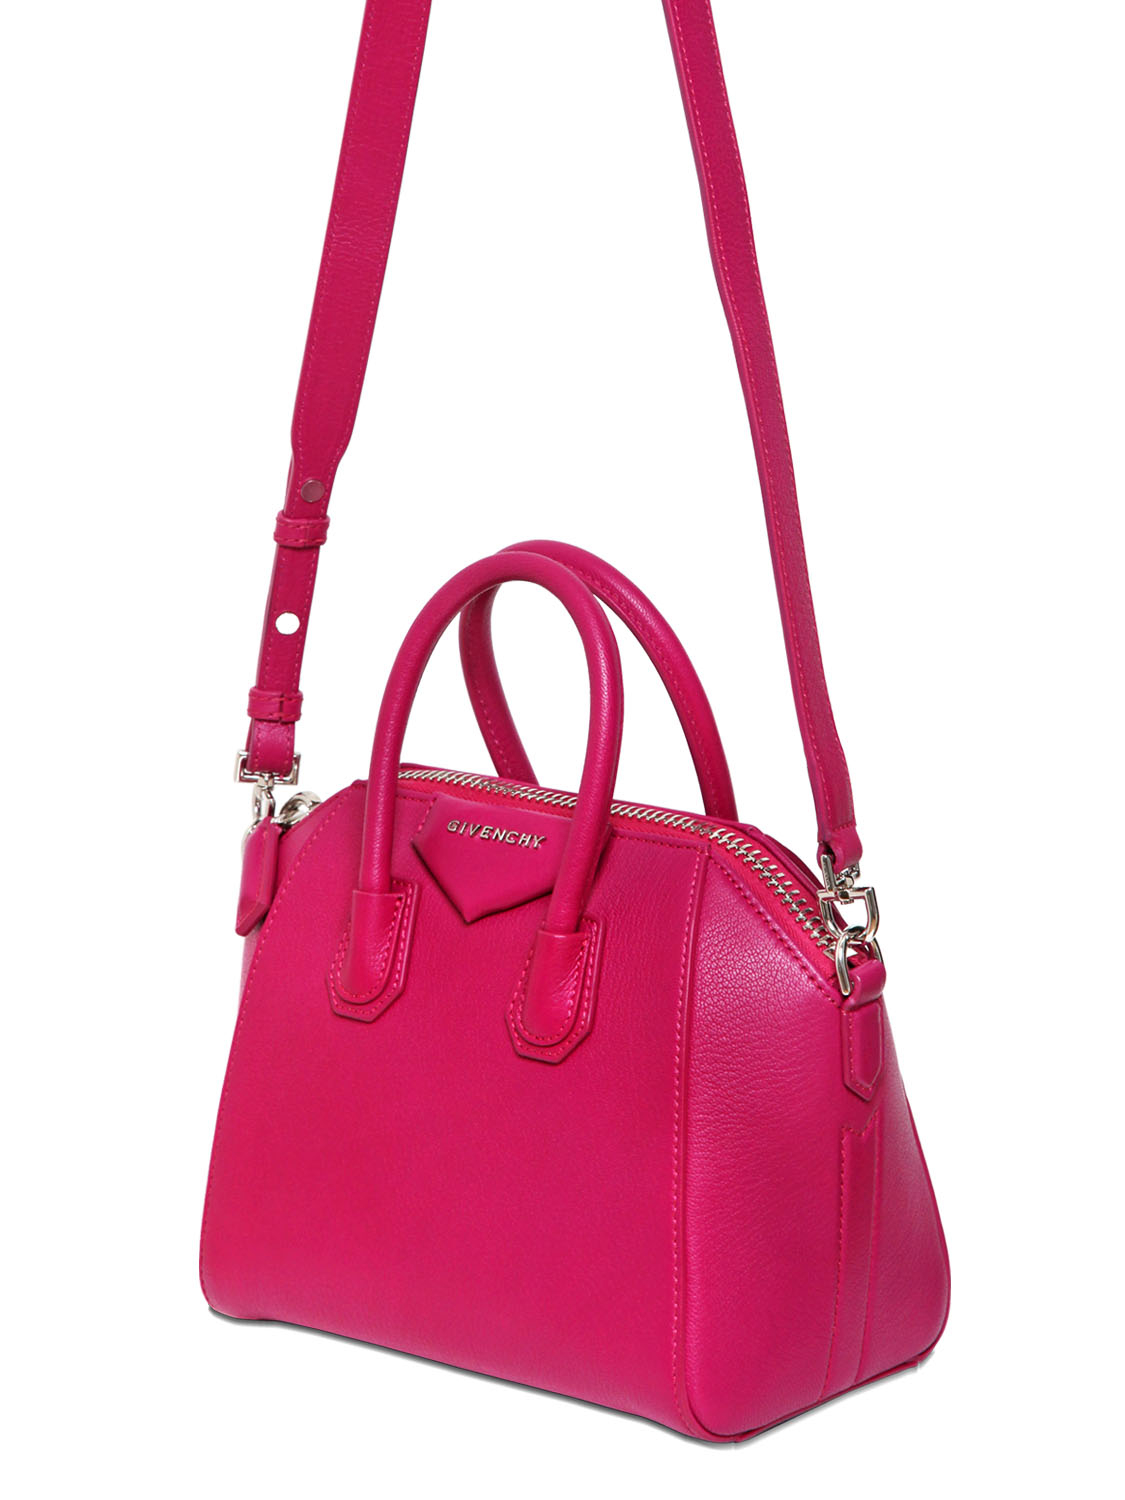 Lyst - Givenchy Mini Antigona Grained Leather Bag in Pink